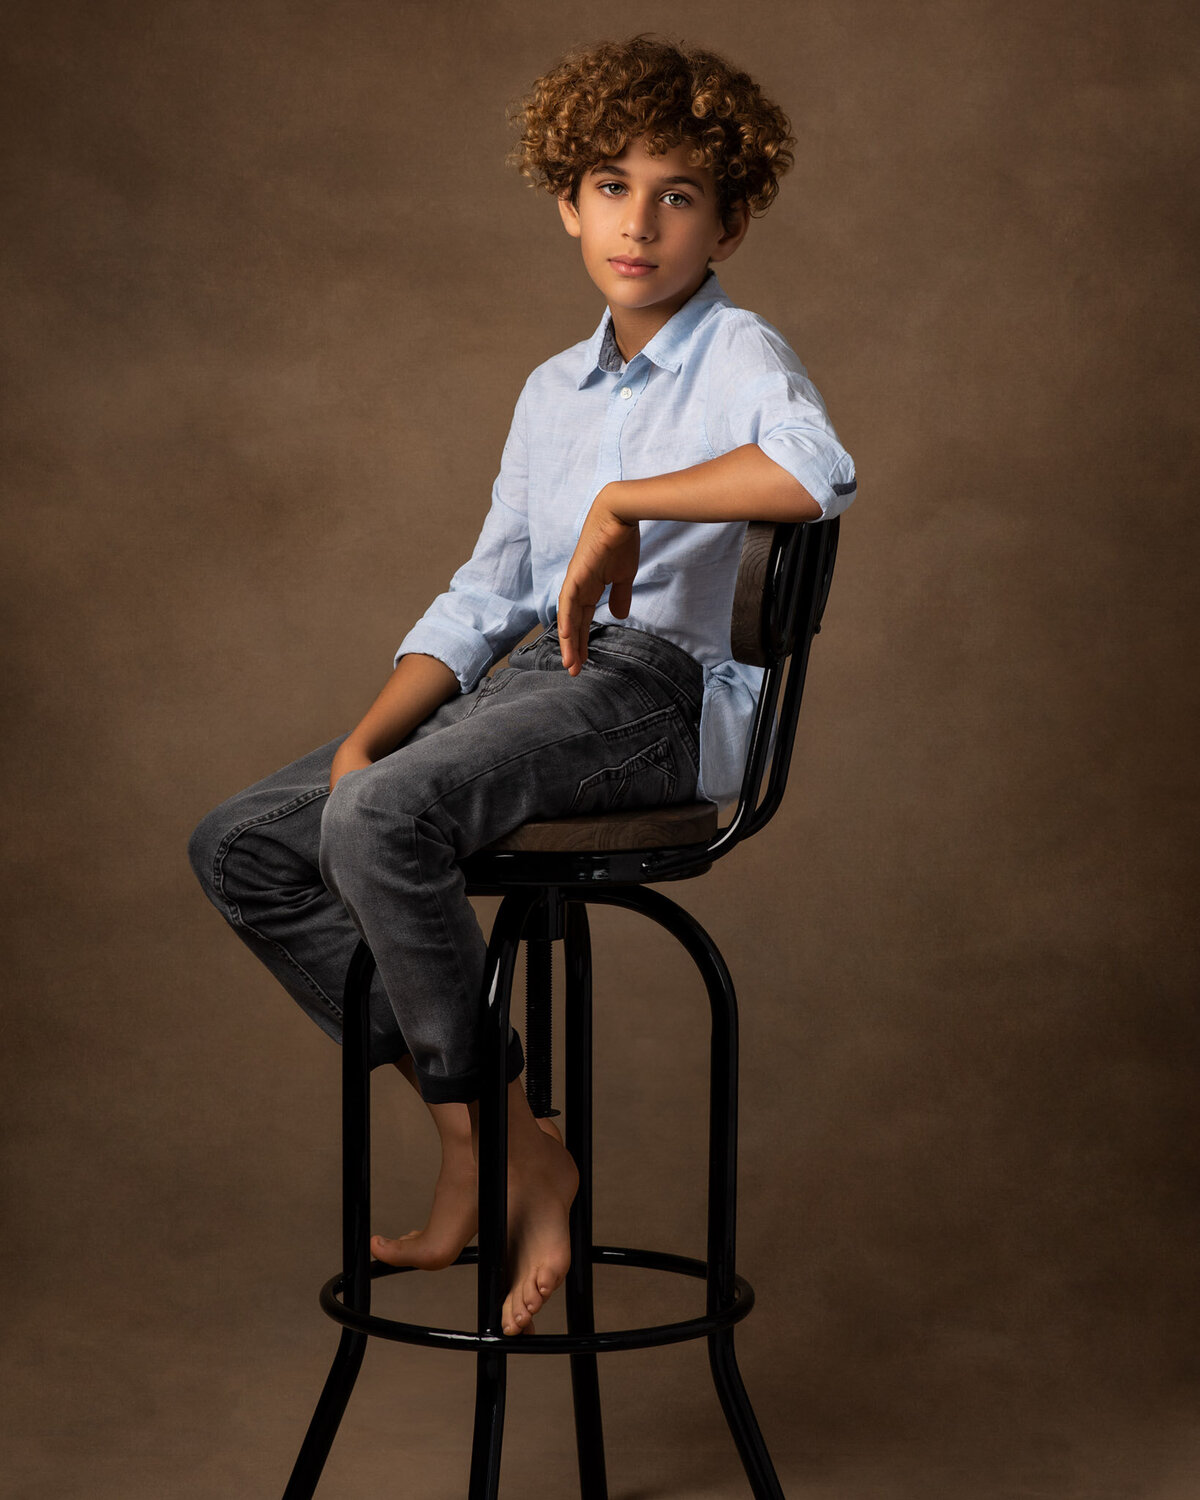 Relaxed sitting boy's portrait leaning on the back of the chair